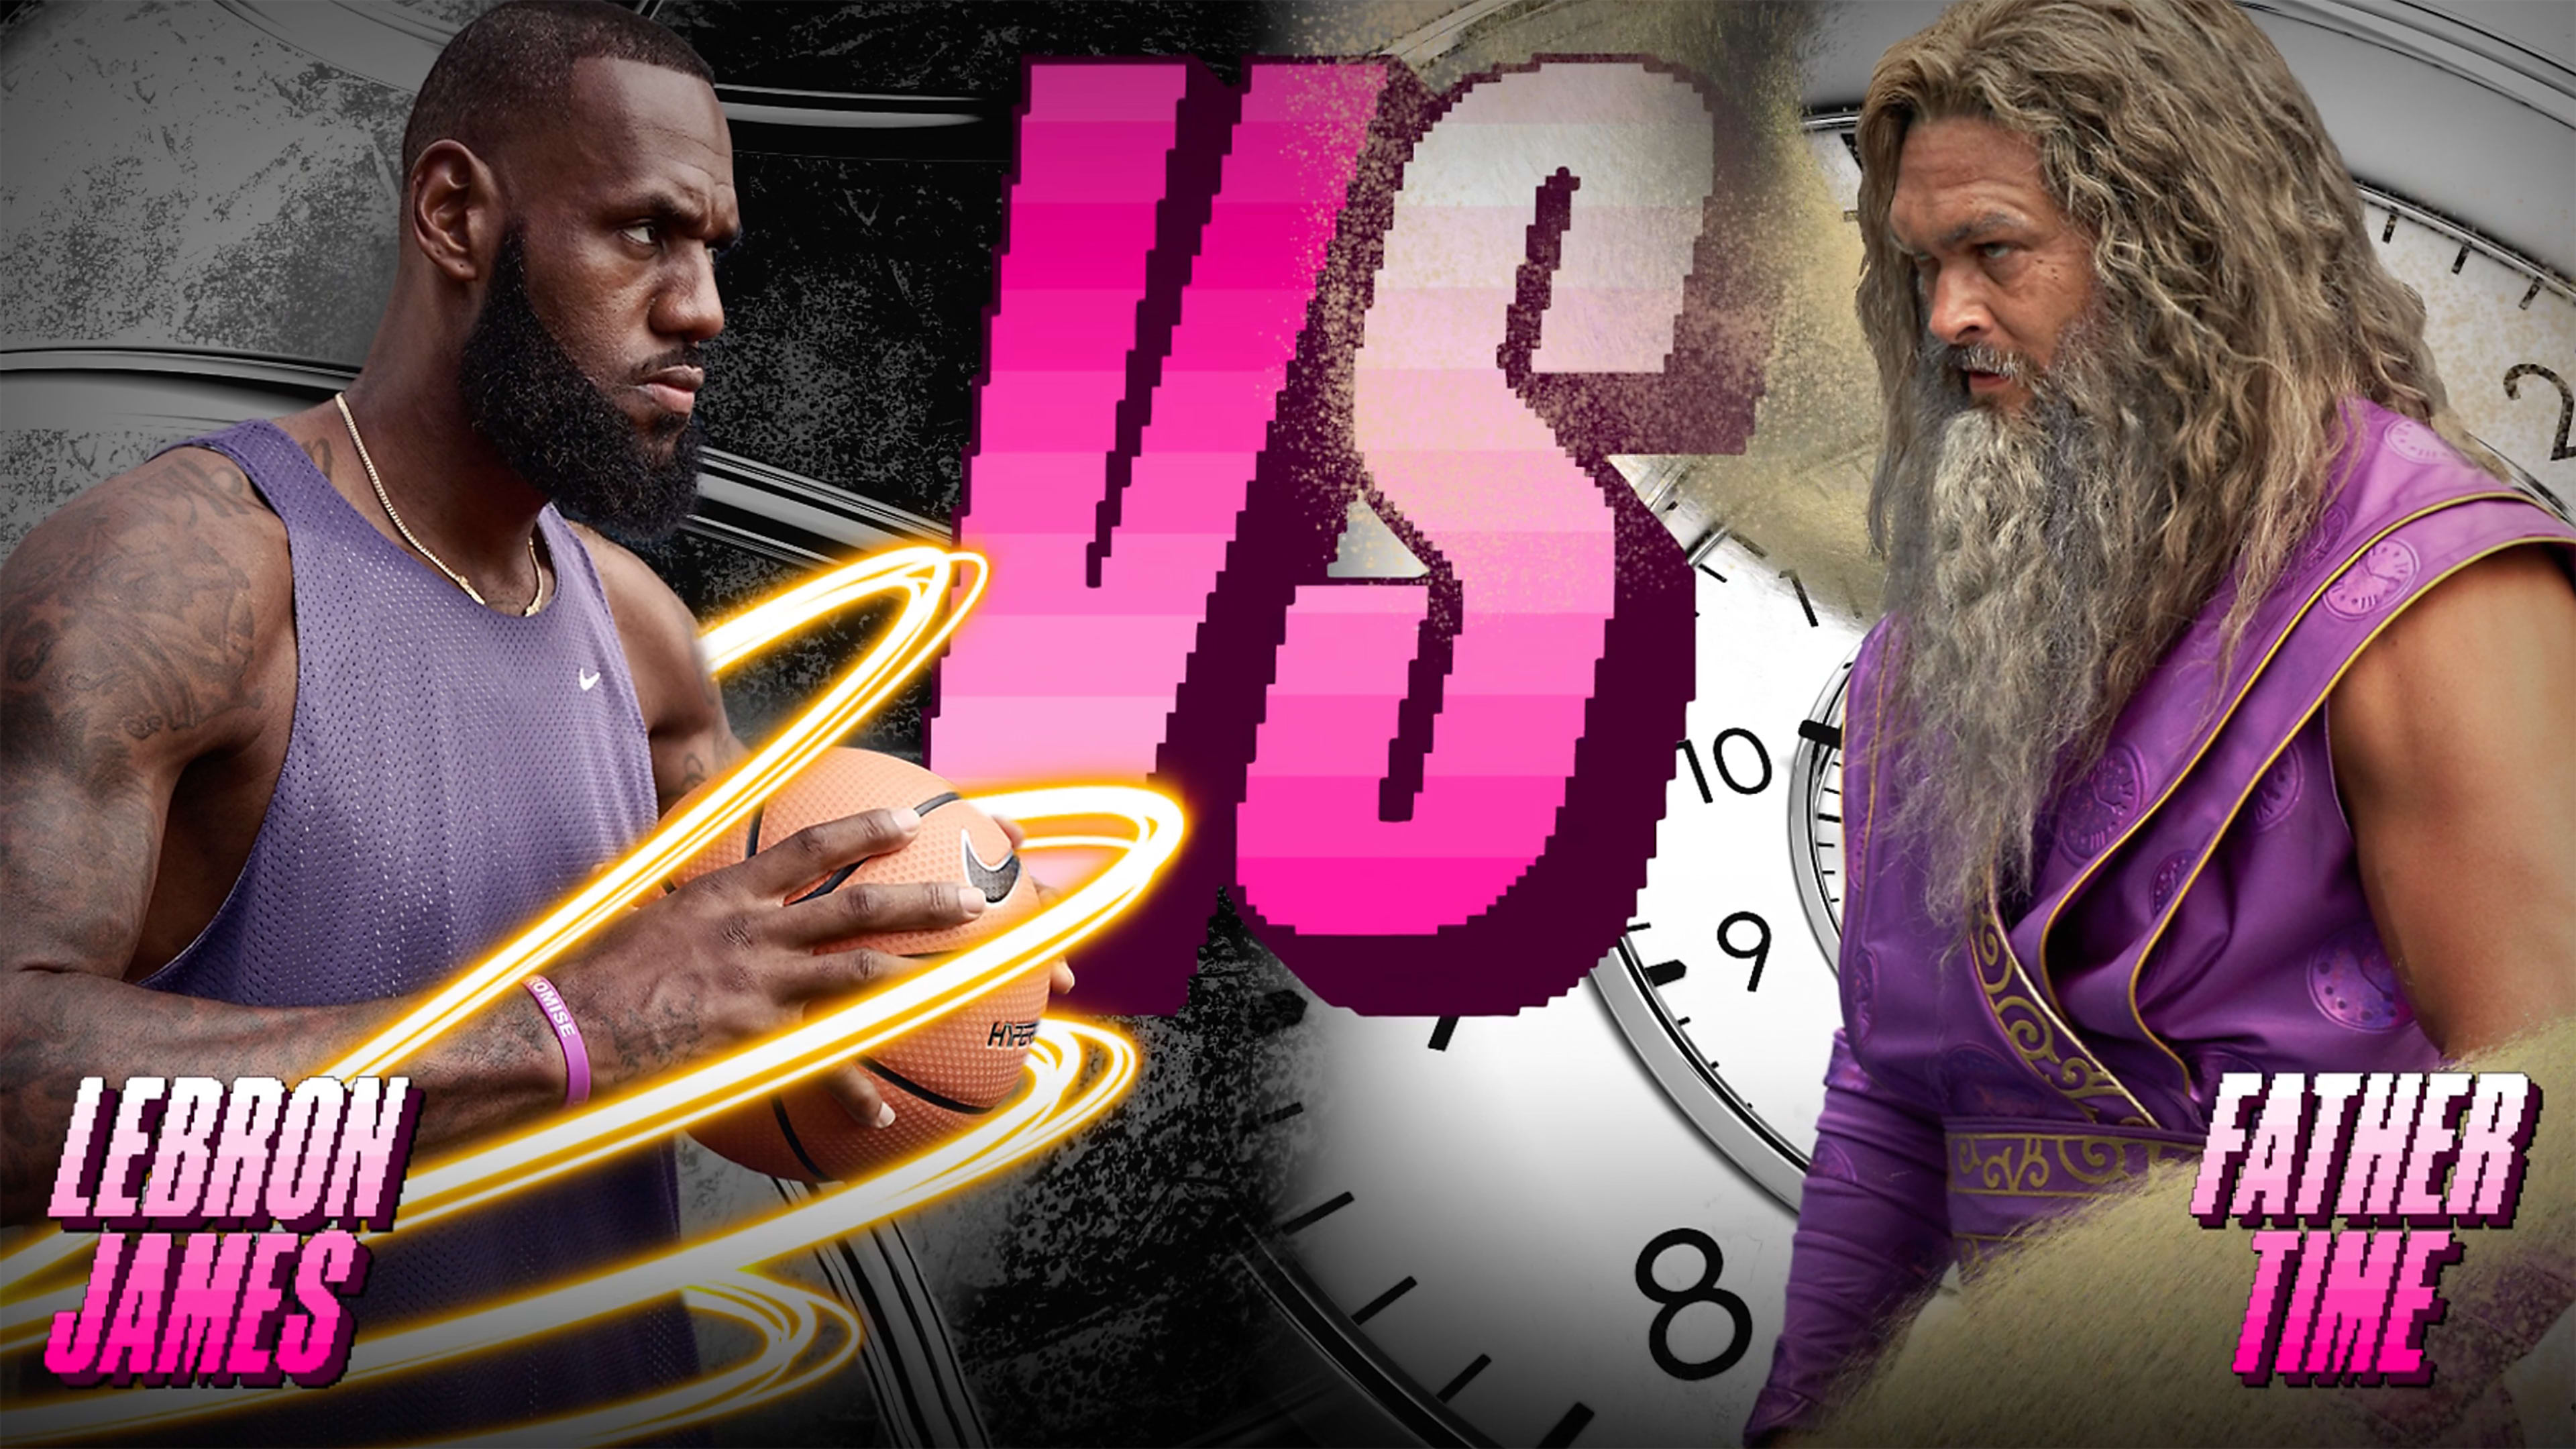 LeBron James takes on Father Time in a new Nike ad celebrating his 20th NBA season